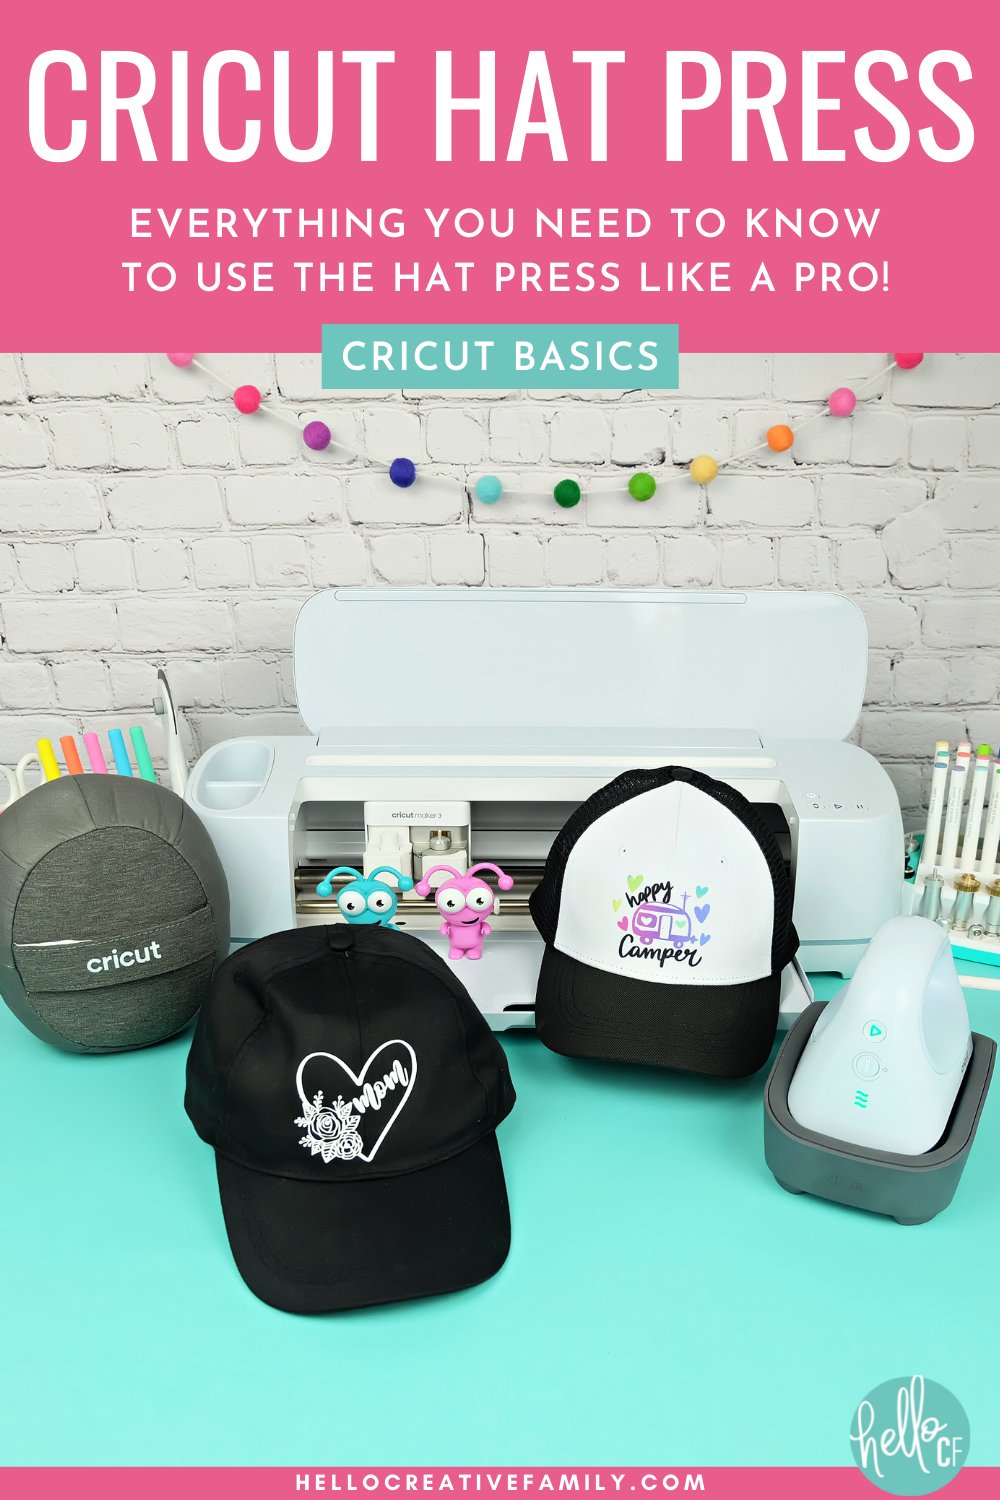 Learn everything you need to know about the Cricut Hat Press! This amazing hat heat press can be used to apply HTV, Infusible Ink and sublimation products to baseball hats, caps, sunhats and more! We cover everything you need to know about this amazing machine, plus walk you through step by step how to use it to make DIY hats using Iron-on HTV, Infusbile Ink and Sublimation. 